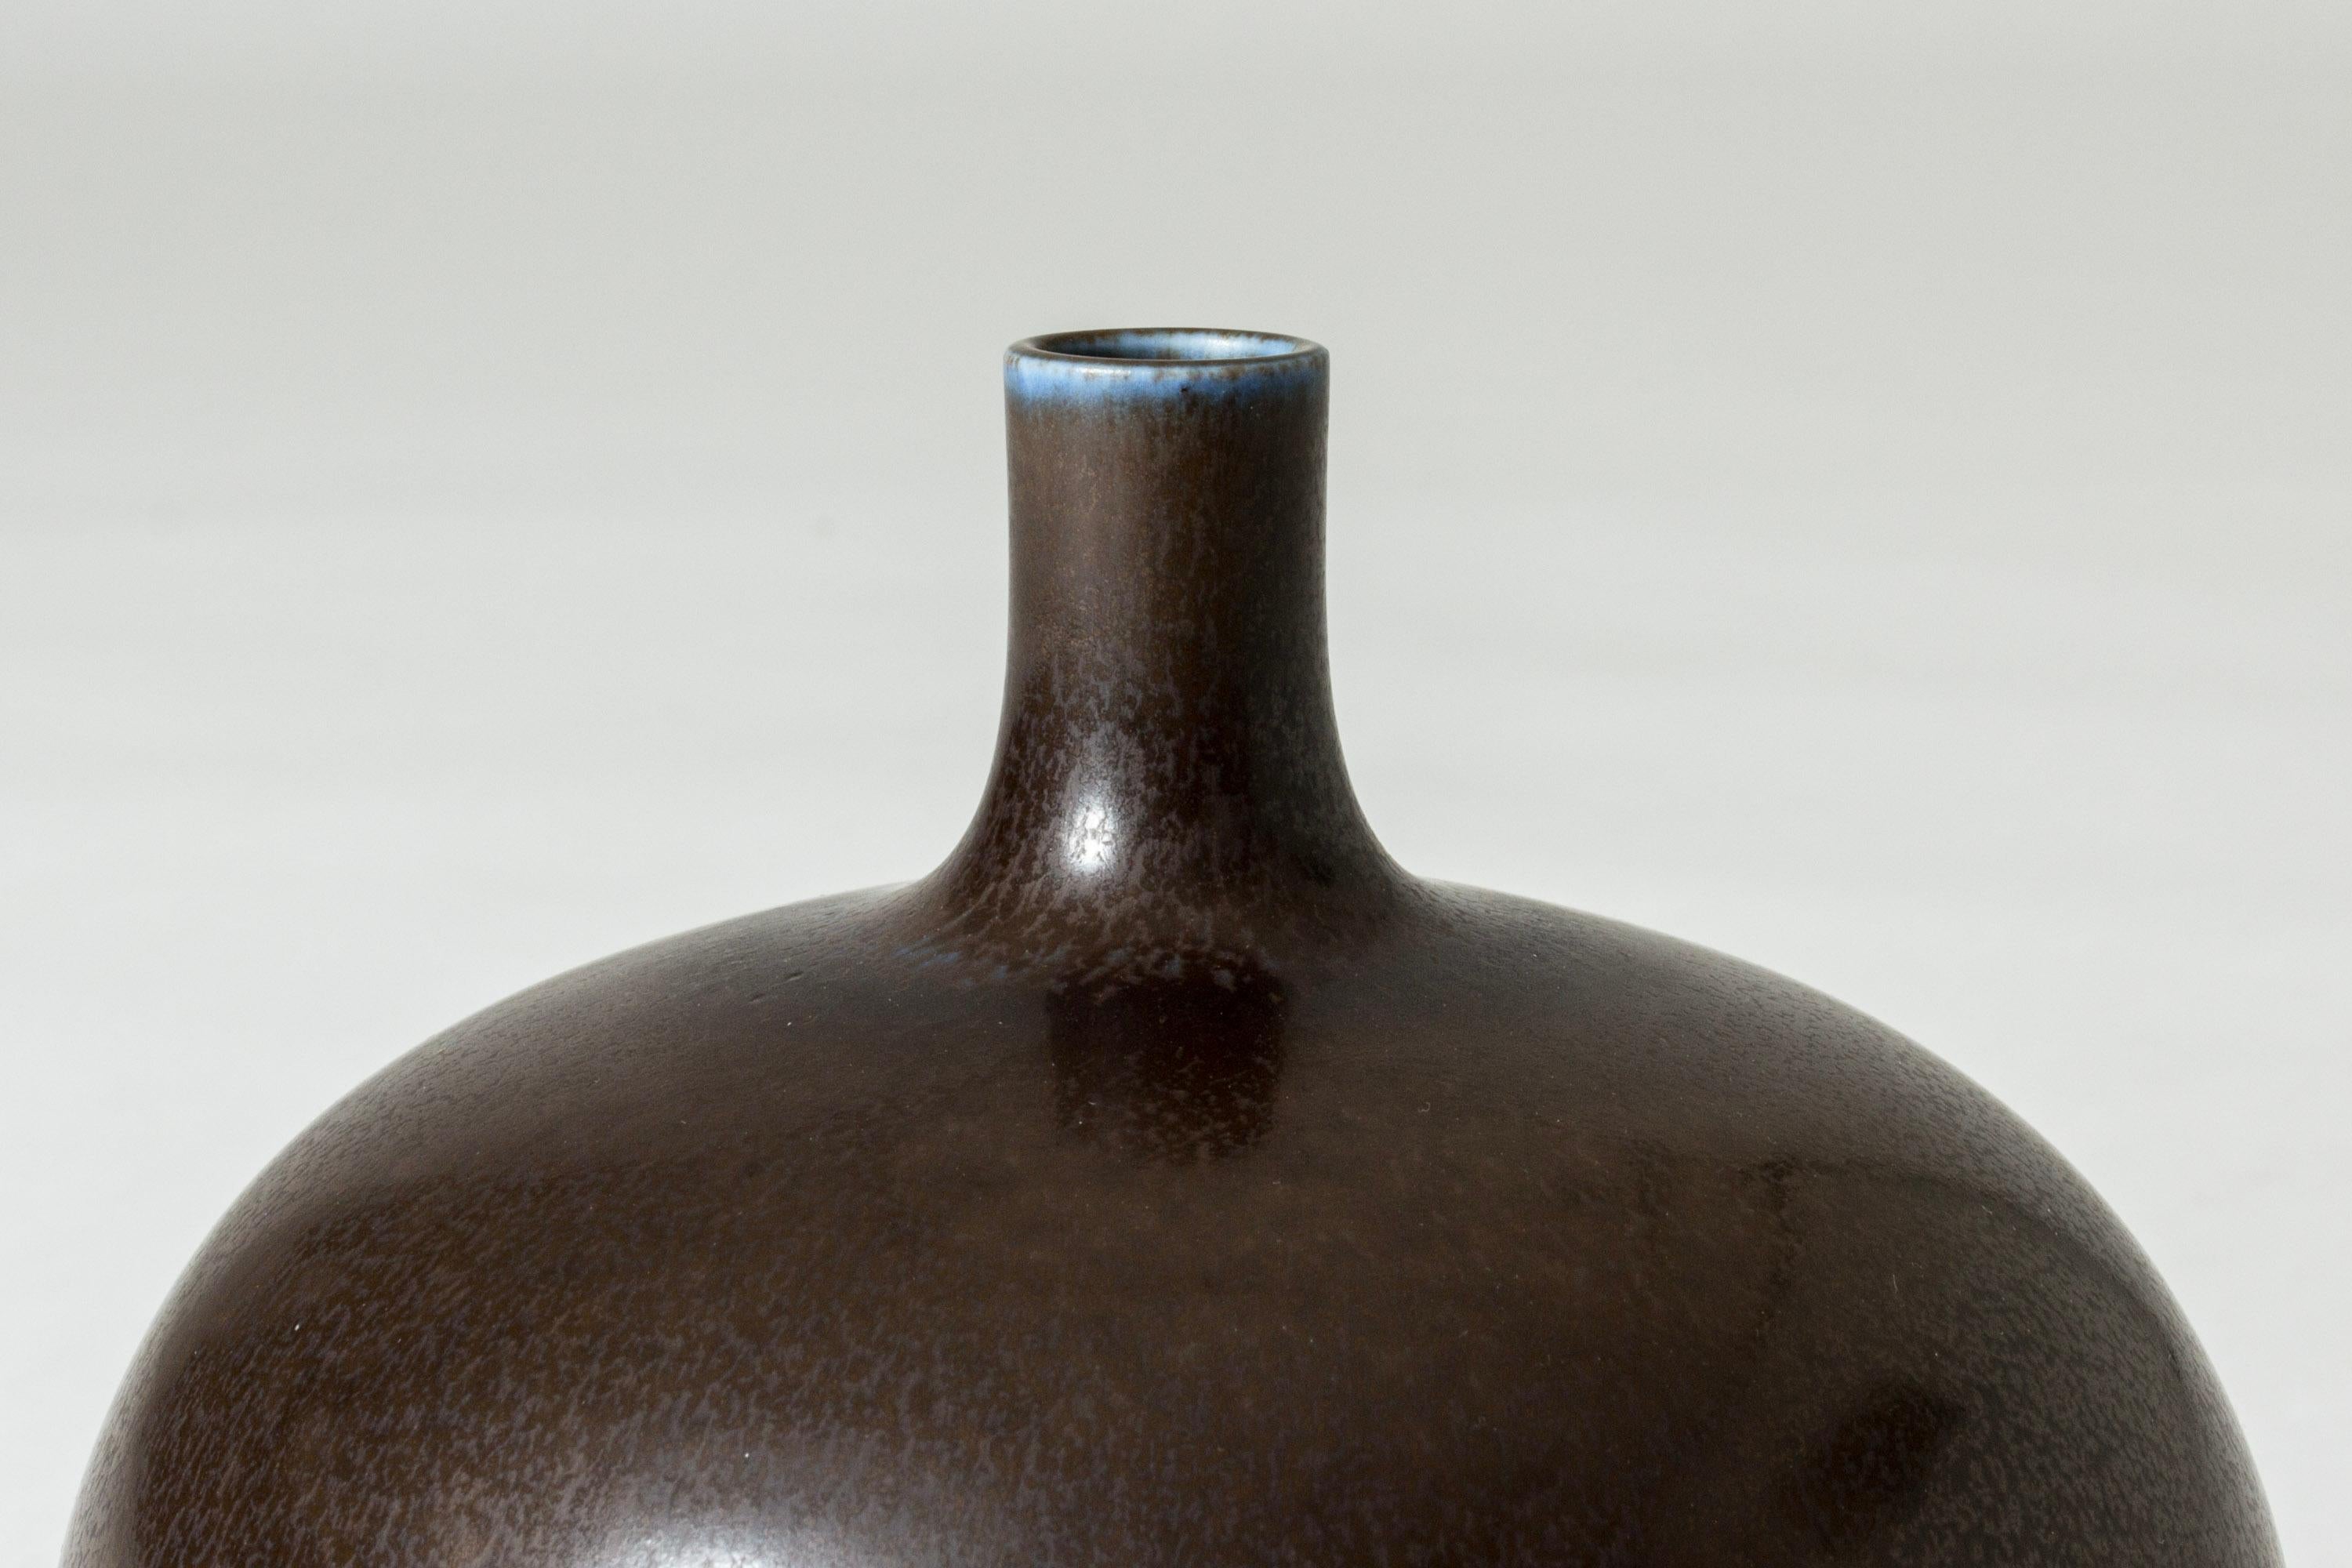 Beautiful stoneware vase by Berndt Friberg in an appealing, round form. Brown hare’s fur glaze with a streak of blue around the rim.

Berndt Friberg was a Swedish ceramicist, renowned for his stoneware vases and vessels for Gustavsberg. His pure,